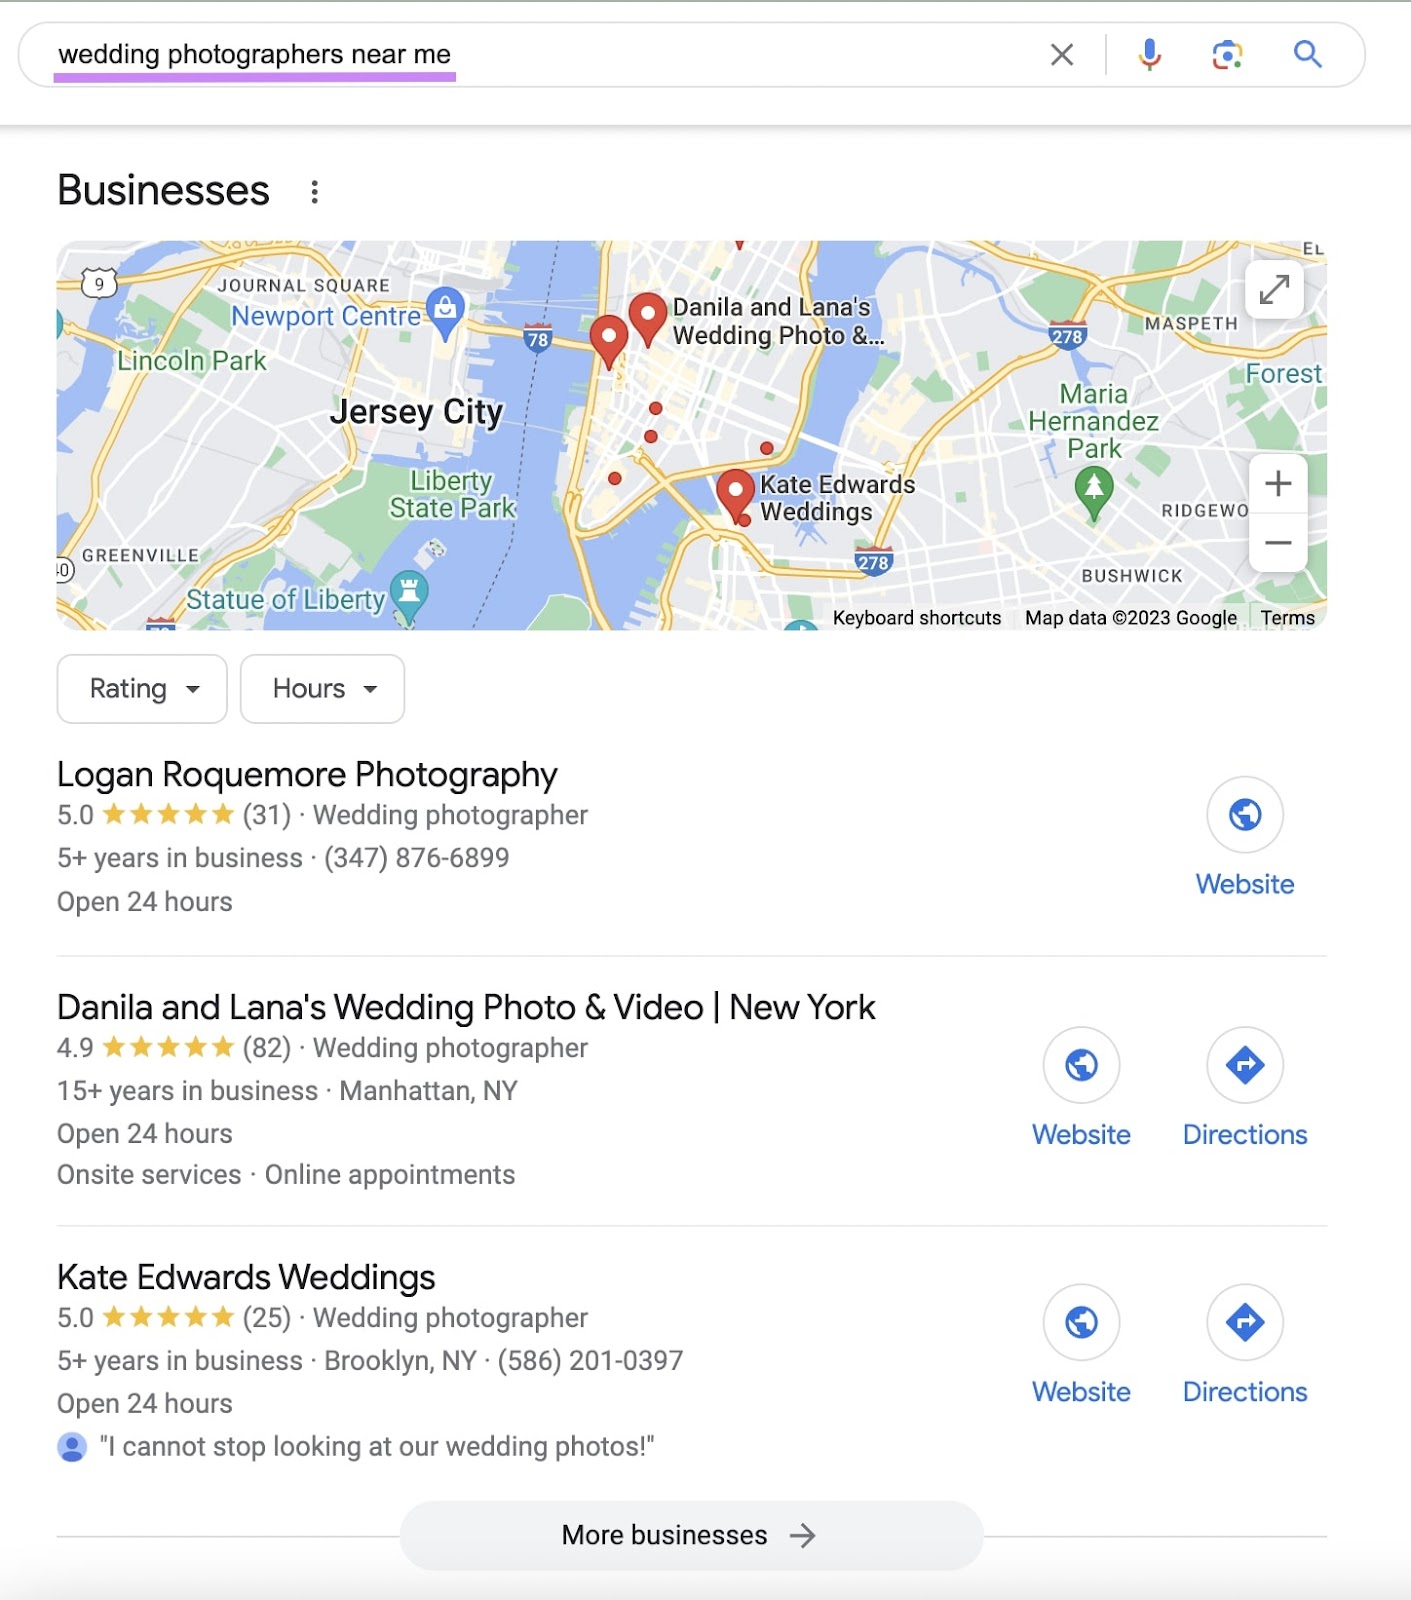 Google’s local pack results for "wedding photographers near me" query